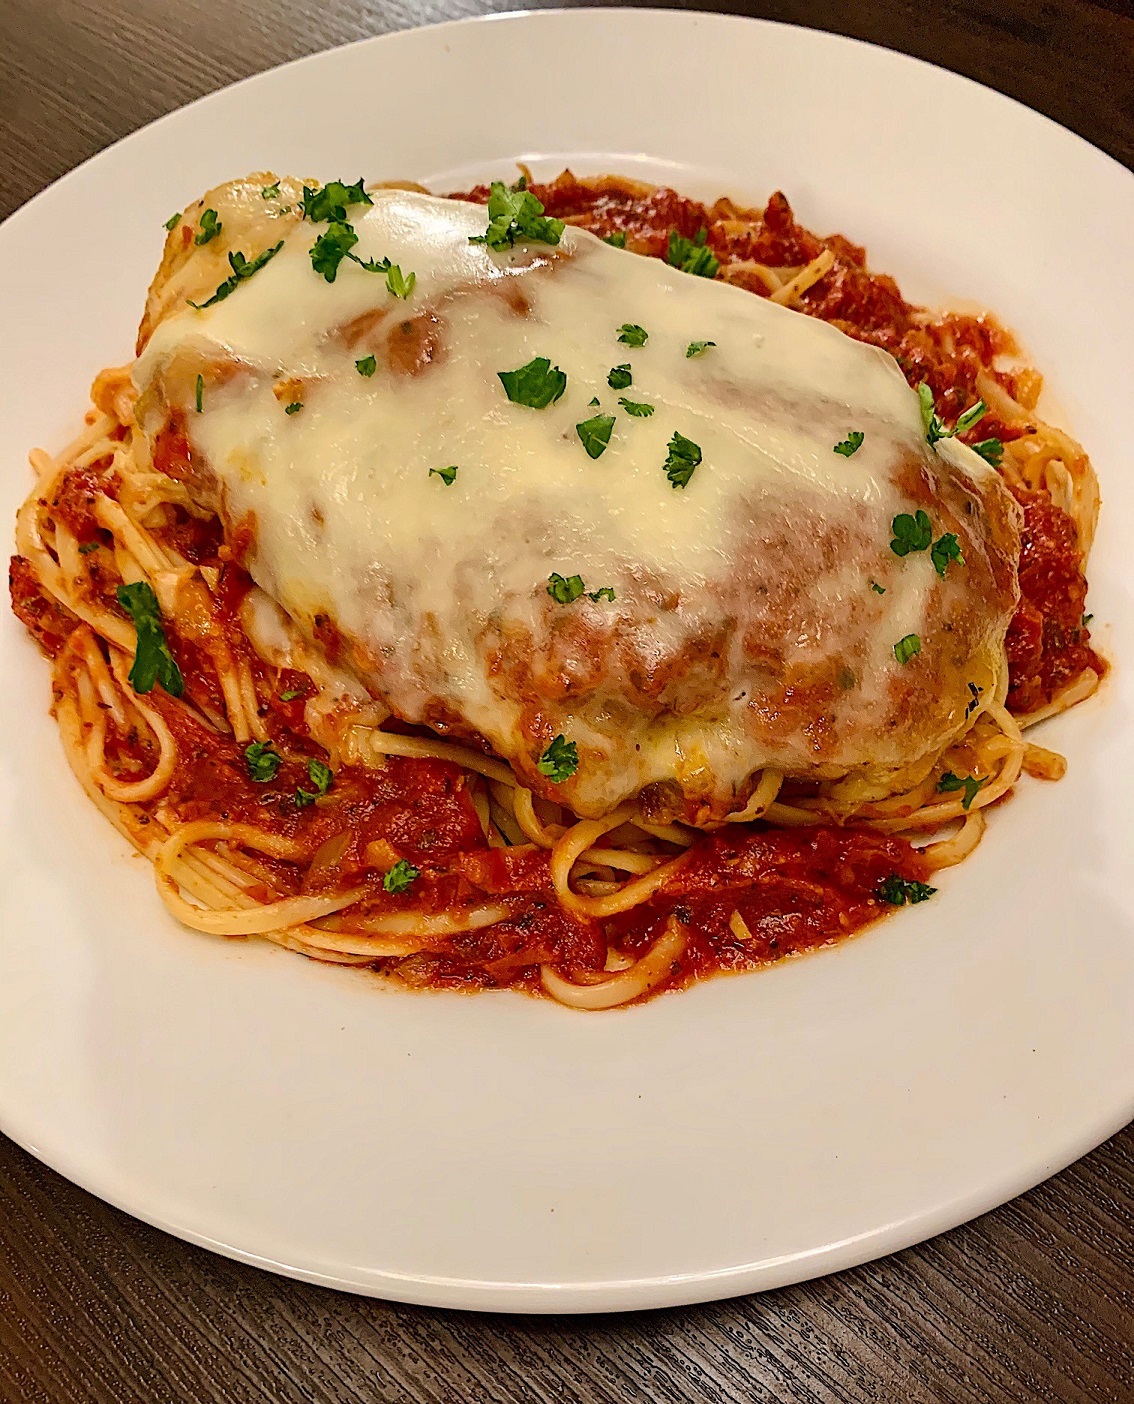 Parmesan-crusted chicken breasts, topped with fresh mozzarella, and baked in a rich marinara sauce.